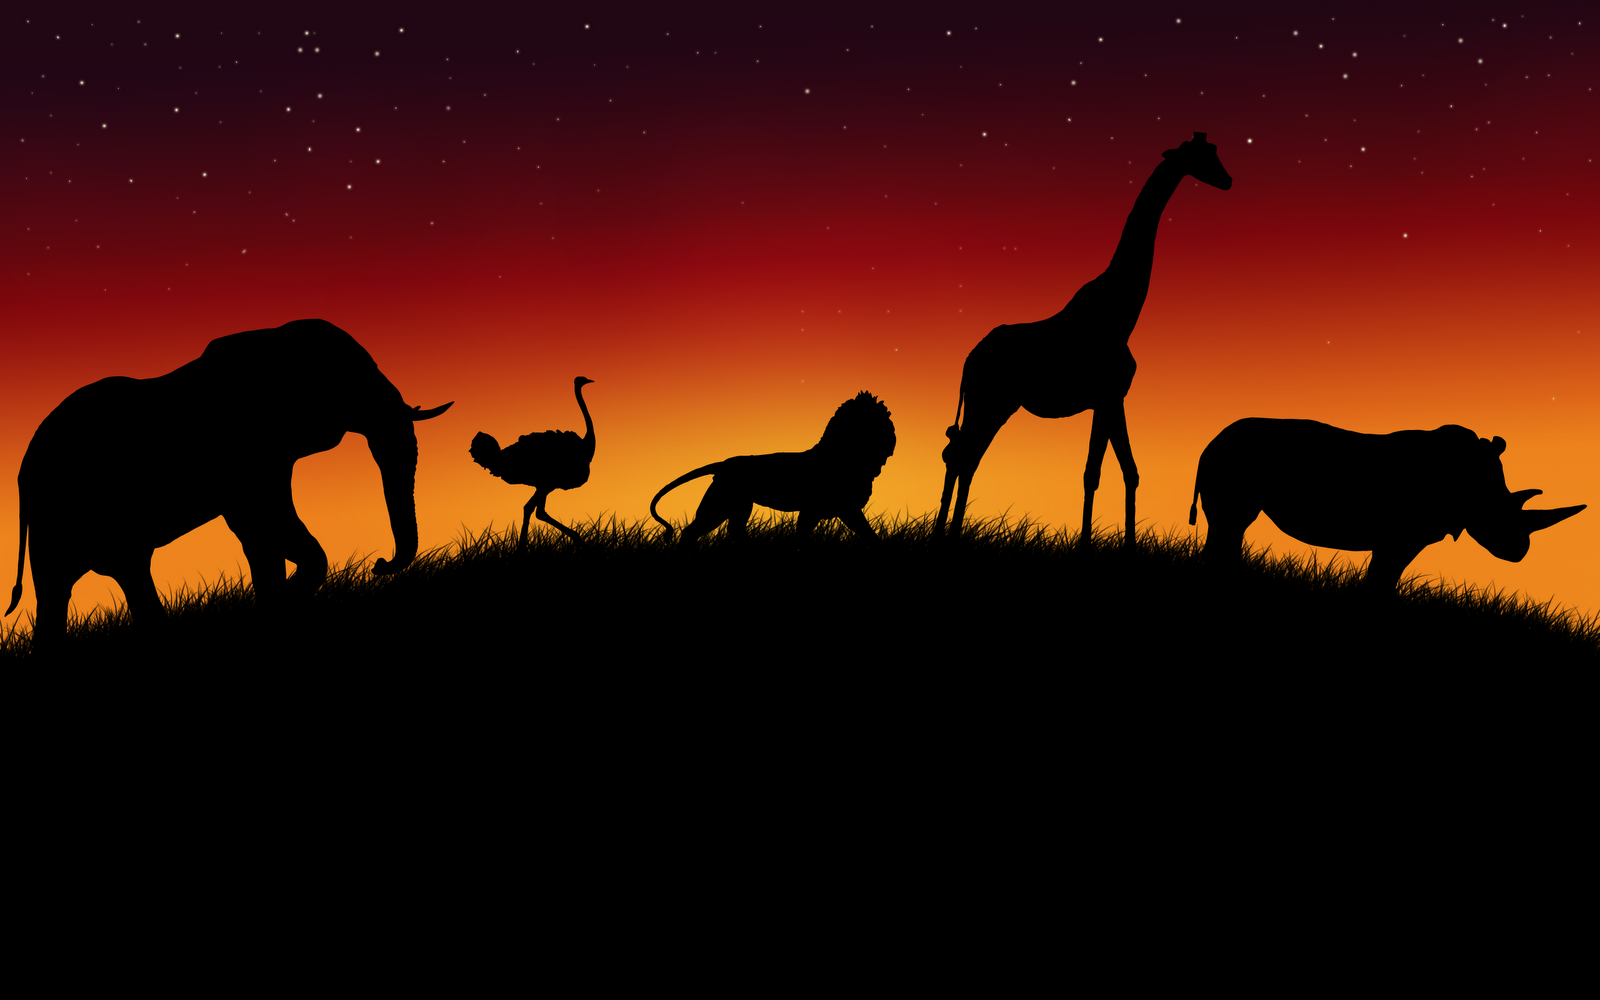 African Animals Wallpapers